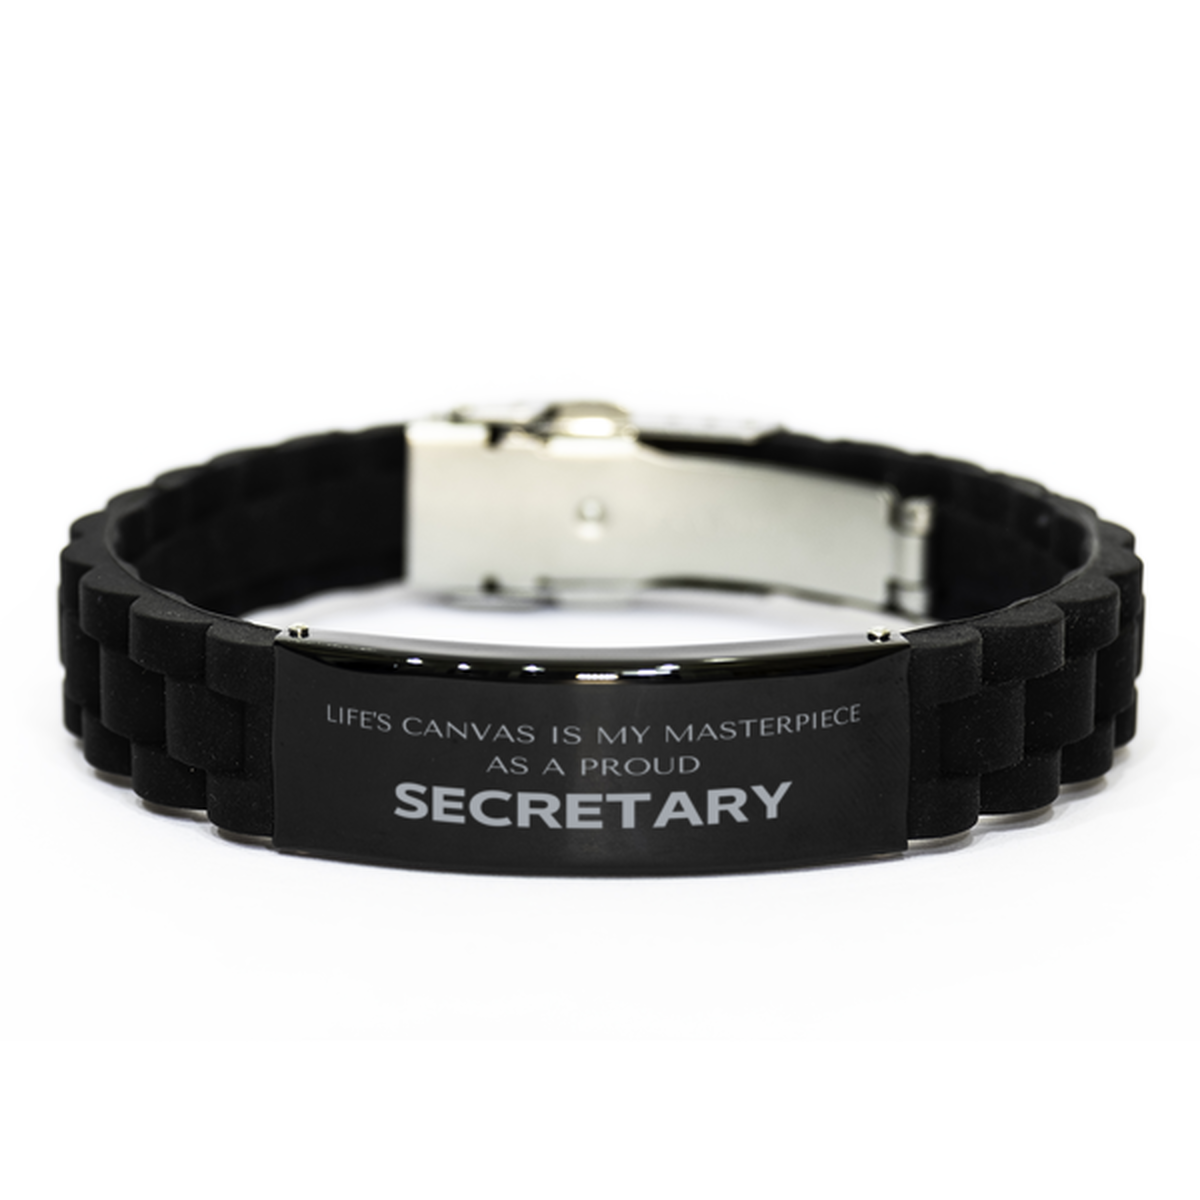 Proud Secretary Gifts, Life's canvas is my masterpiece, Epic Birthday Christmas Unique Black Glidelock Clasp Bracelet For Secretary, Coworkers, Men, Women, Friends